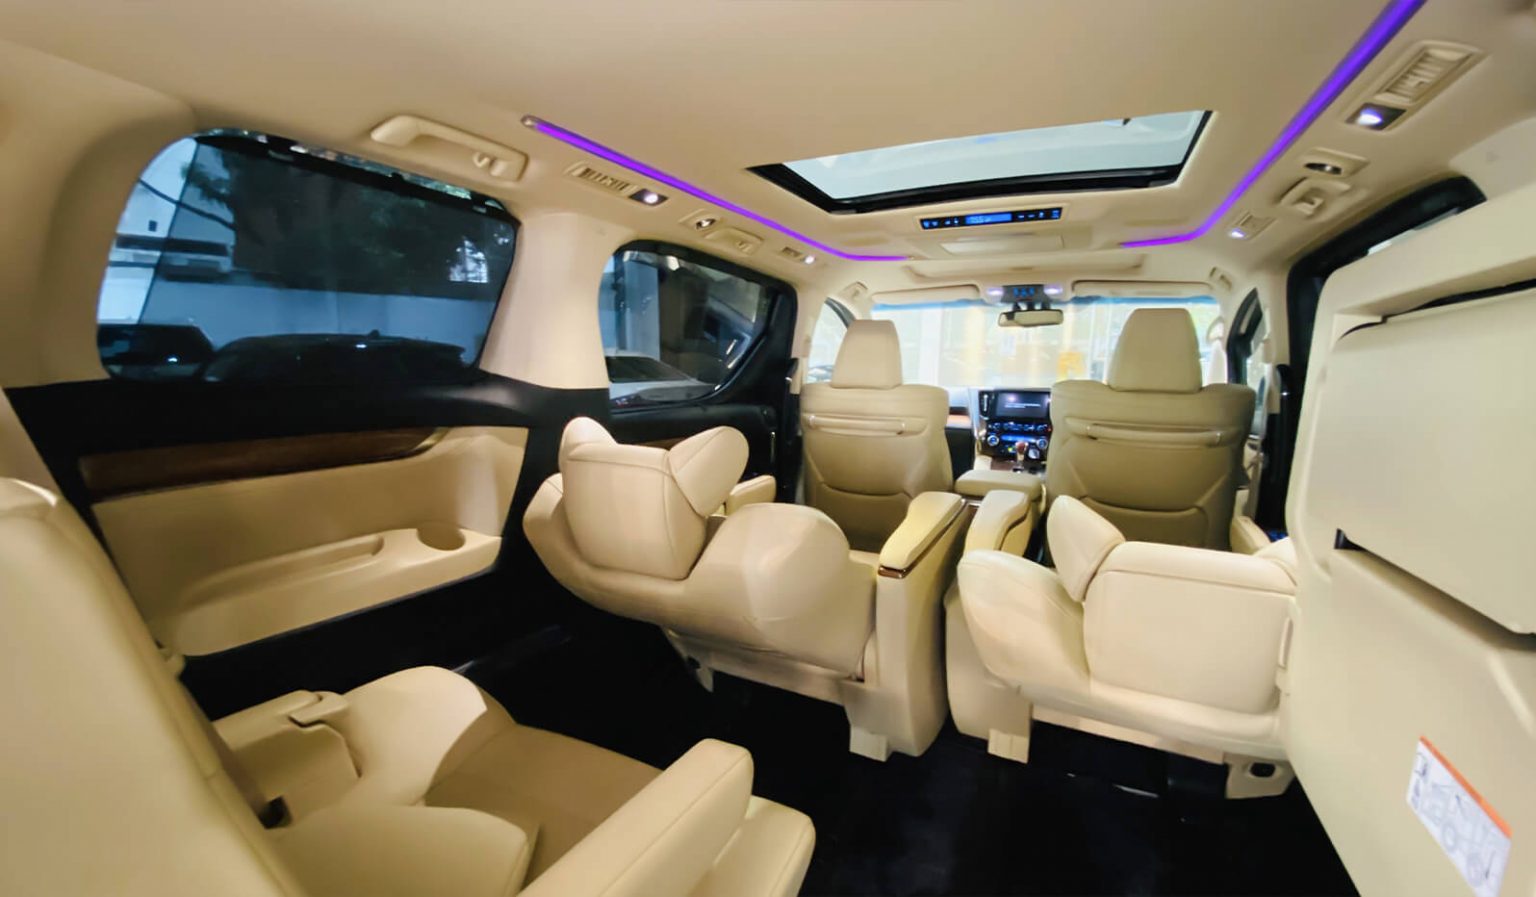 Toyota Alphard: Price in Bangladesh 2021, Specification (Recondition)